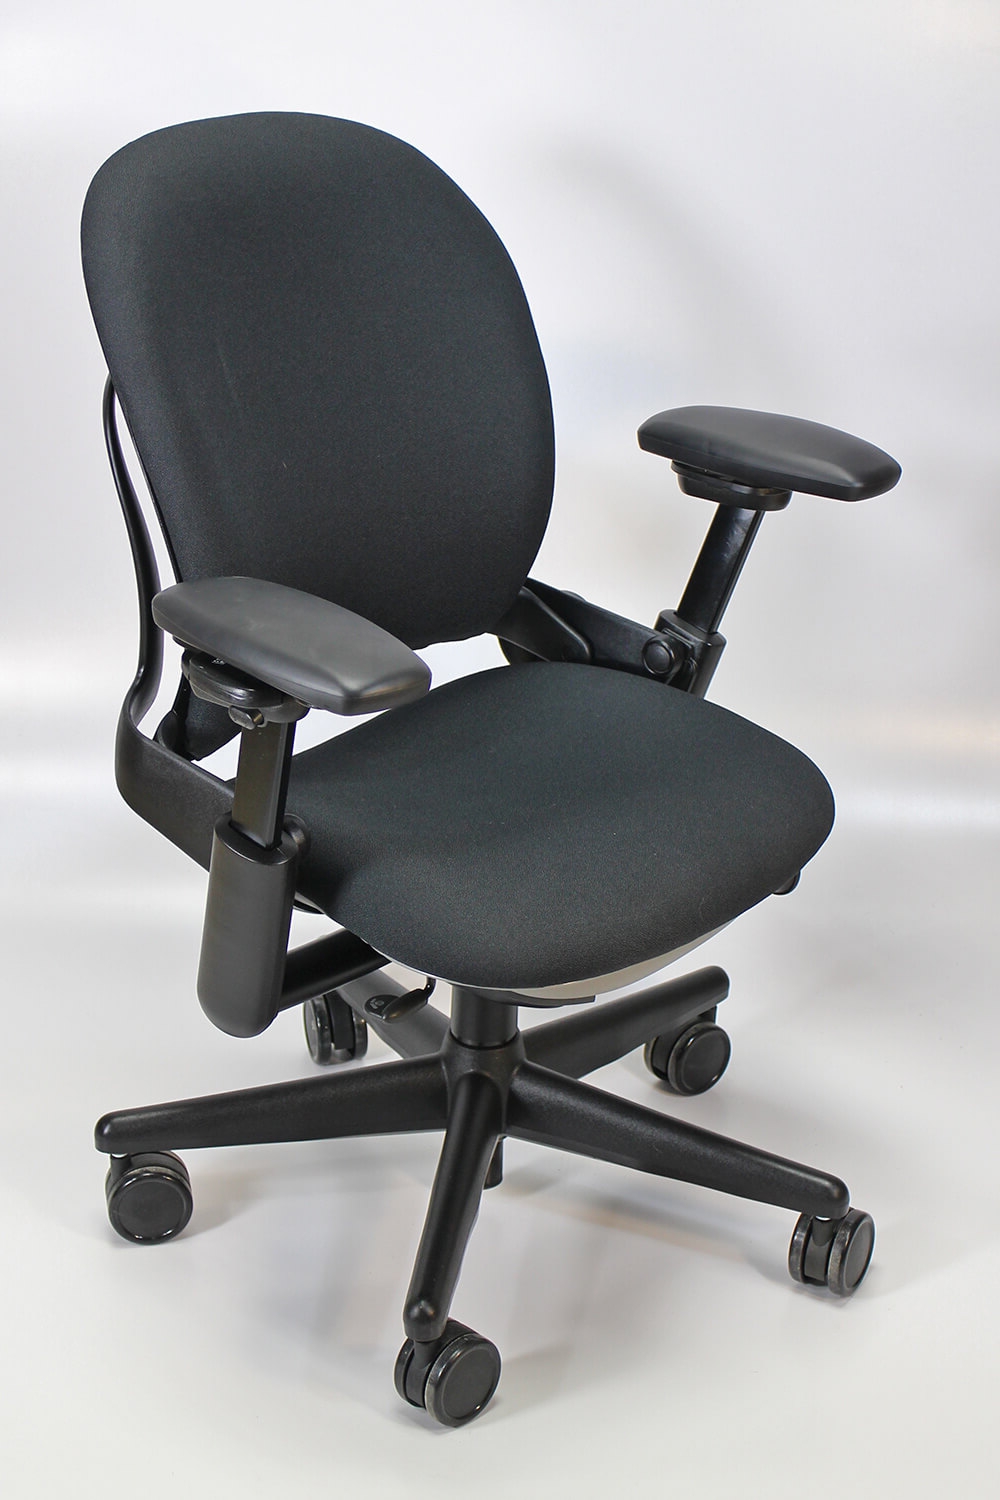 Steelcase Office Chairs - Remanufactured Steelcase Leap Chair Version 1